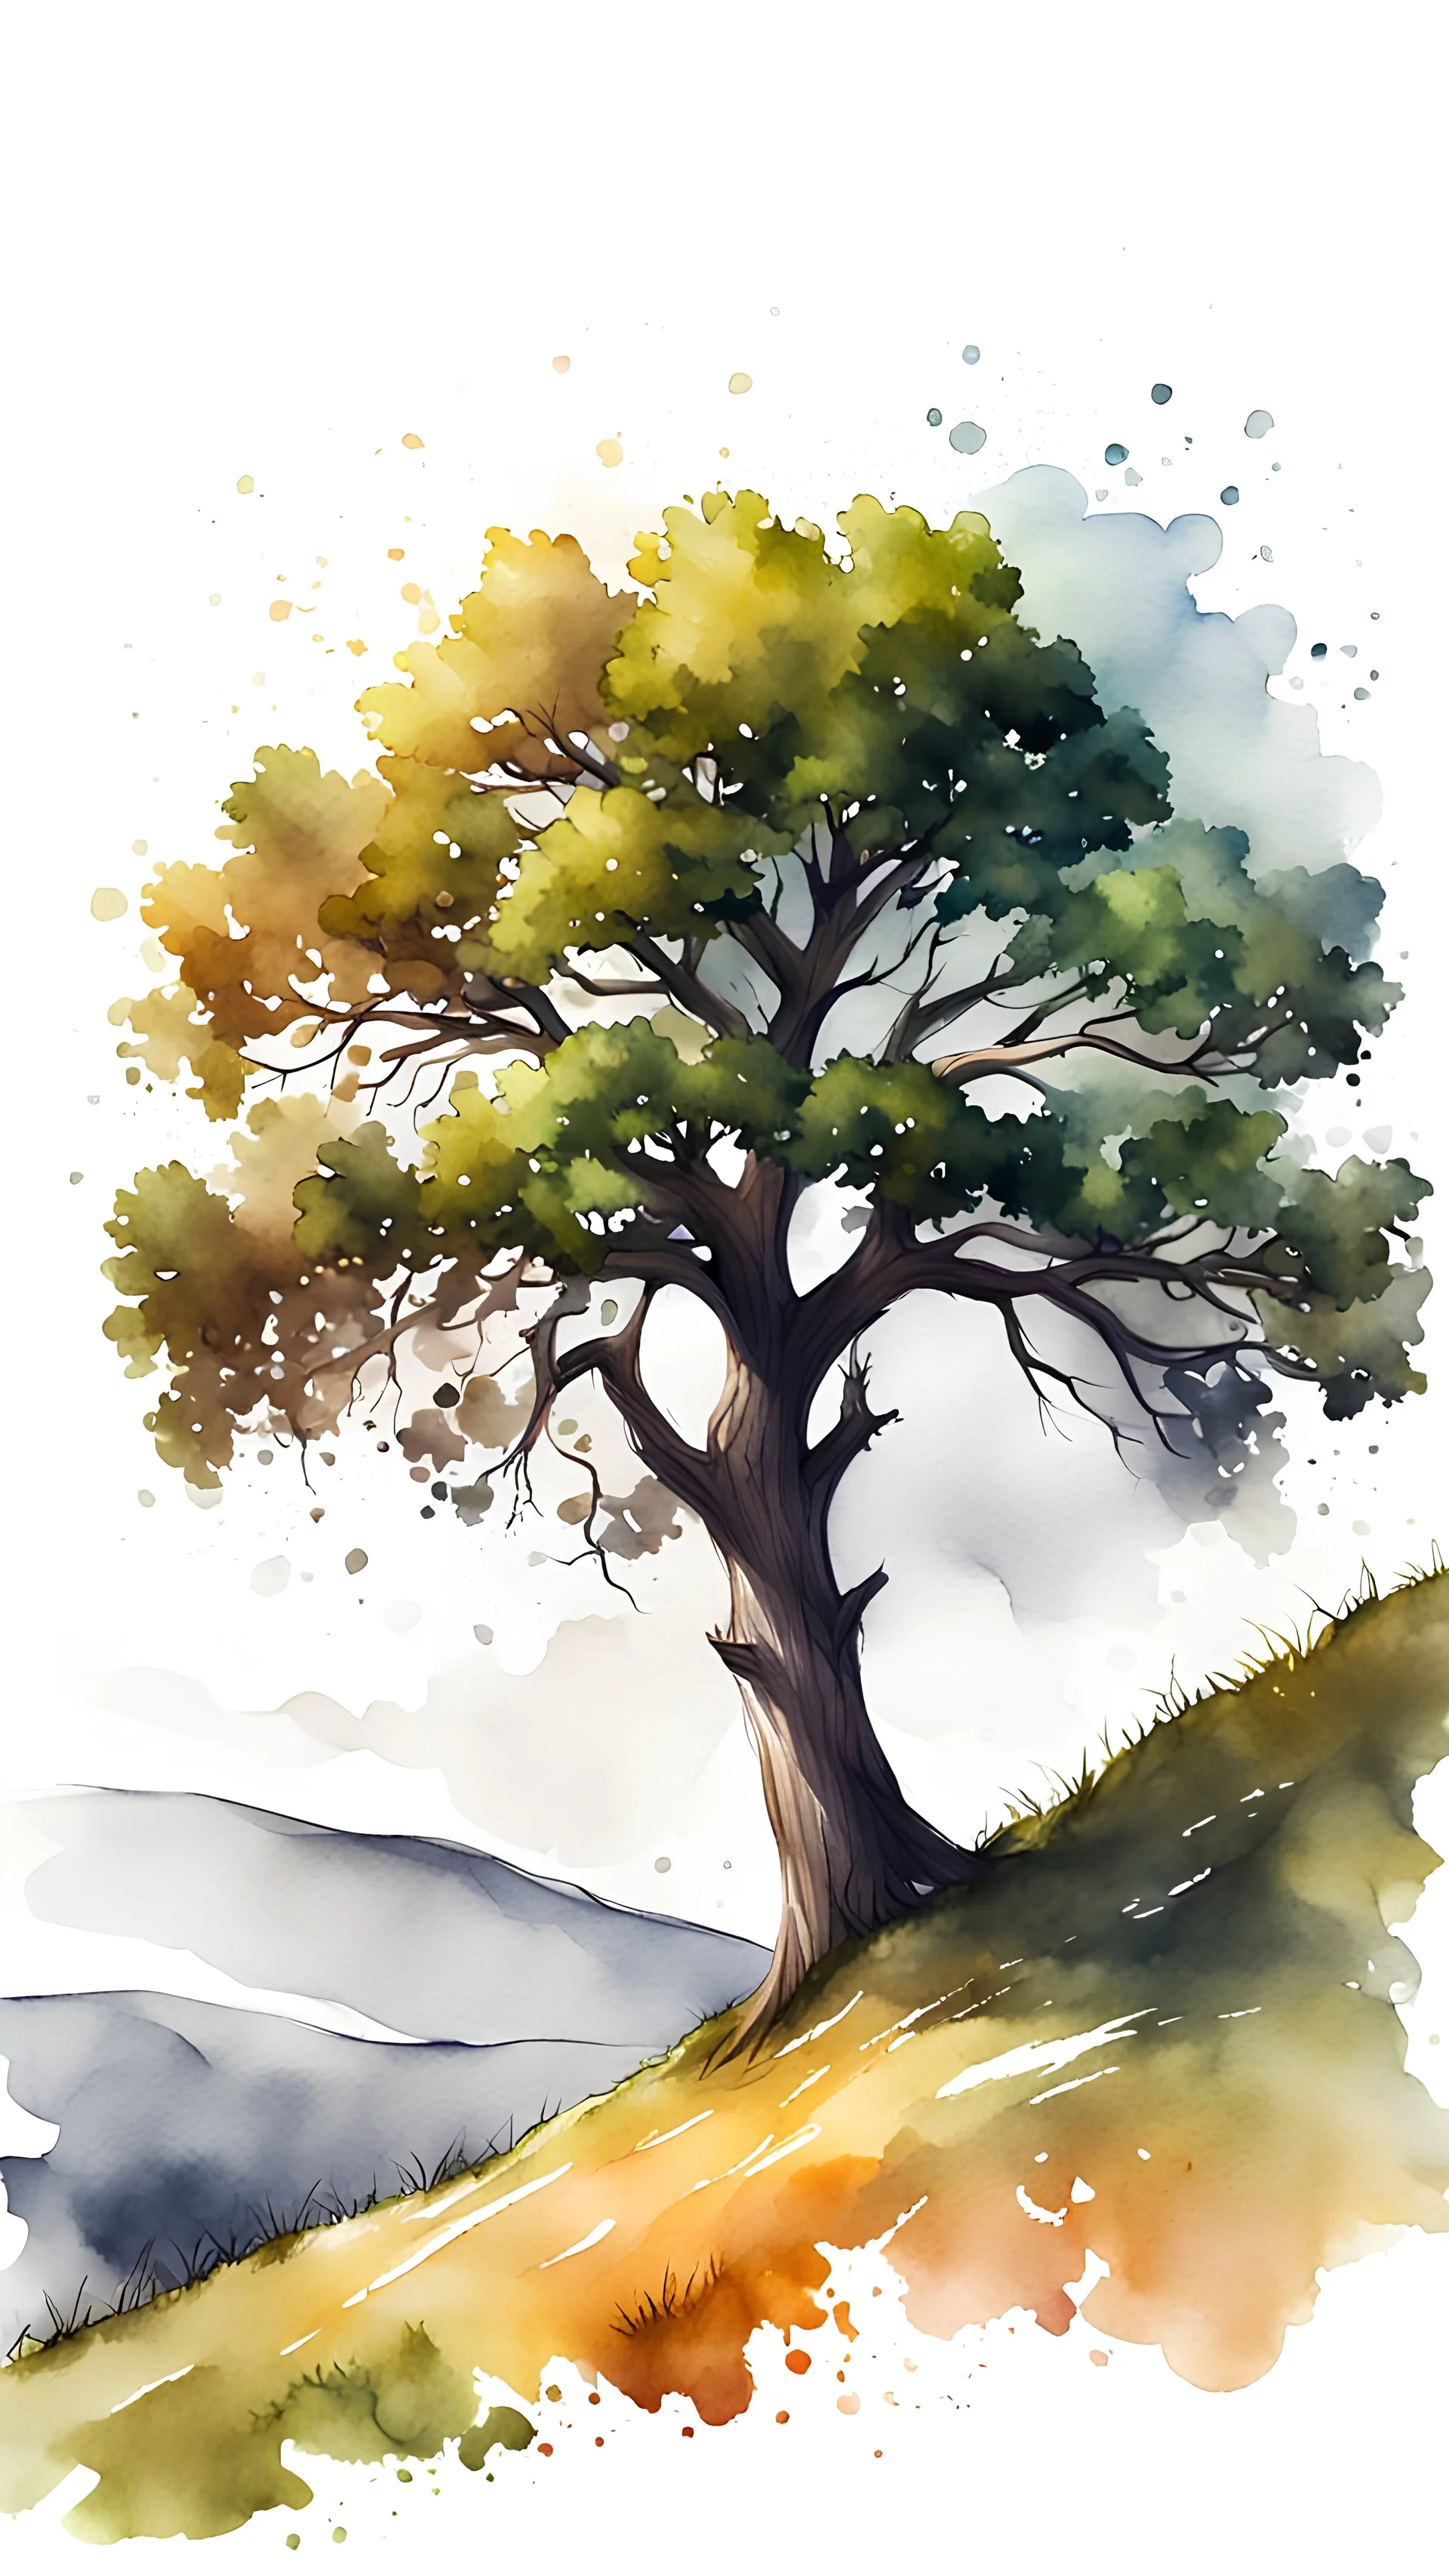 watercolor drawing of an oak tree on a hill on a white background, Trending on Artstation, {creative commons}, fanart, AIart, {Woolitize}, by Charlie Bowater, Illustration, Color Grading, Filmic, Nikon D750, Brenizer Method, Perspective, Depth of Field, Field of View, F/2.8, Lens Flare, Tonal Colors, 8K, Full-HD, ProPhoto RGB, Perfectionism, Rim Lighting, Natural Lighting, Soft Lig